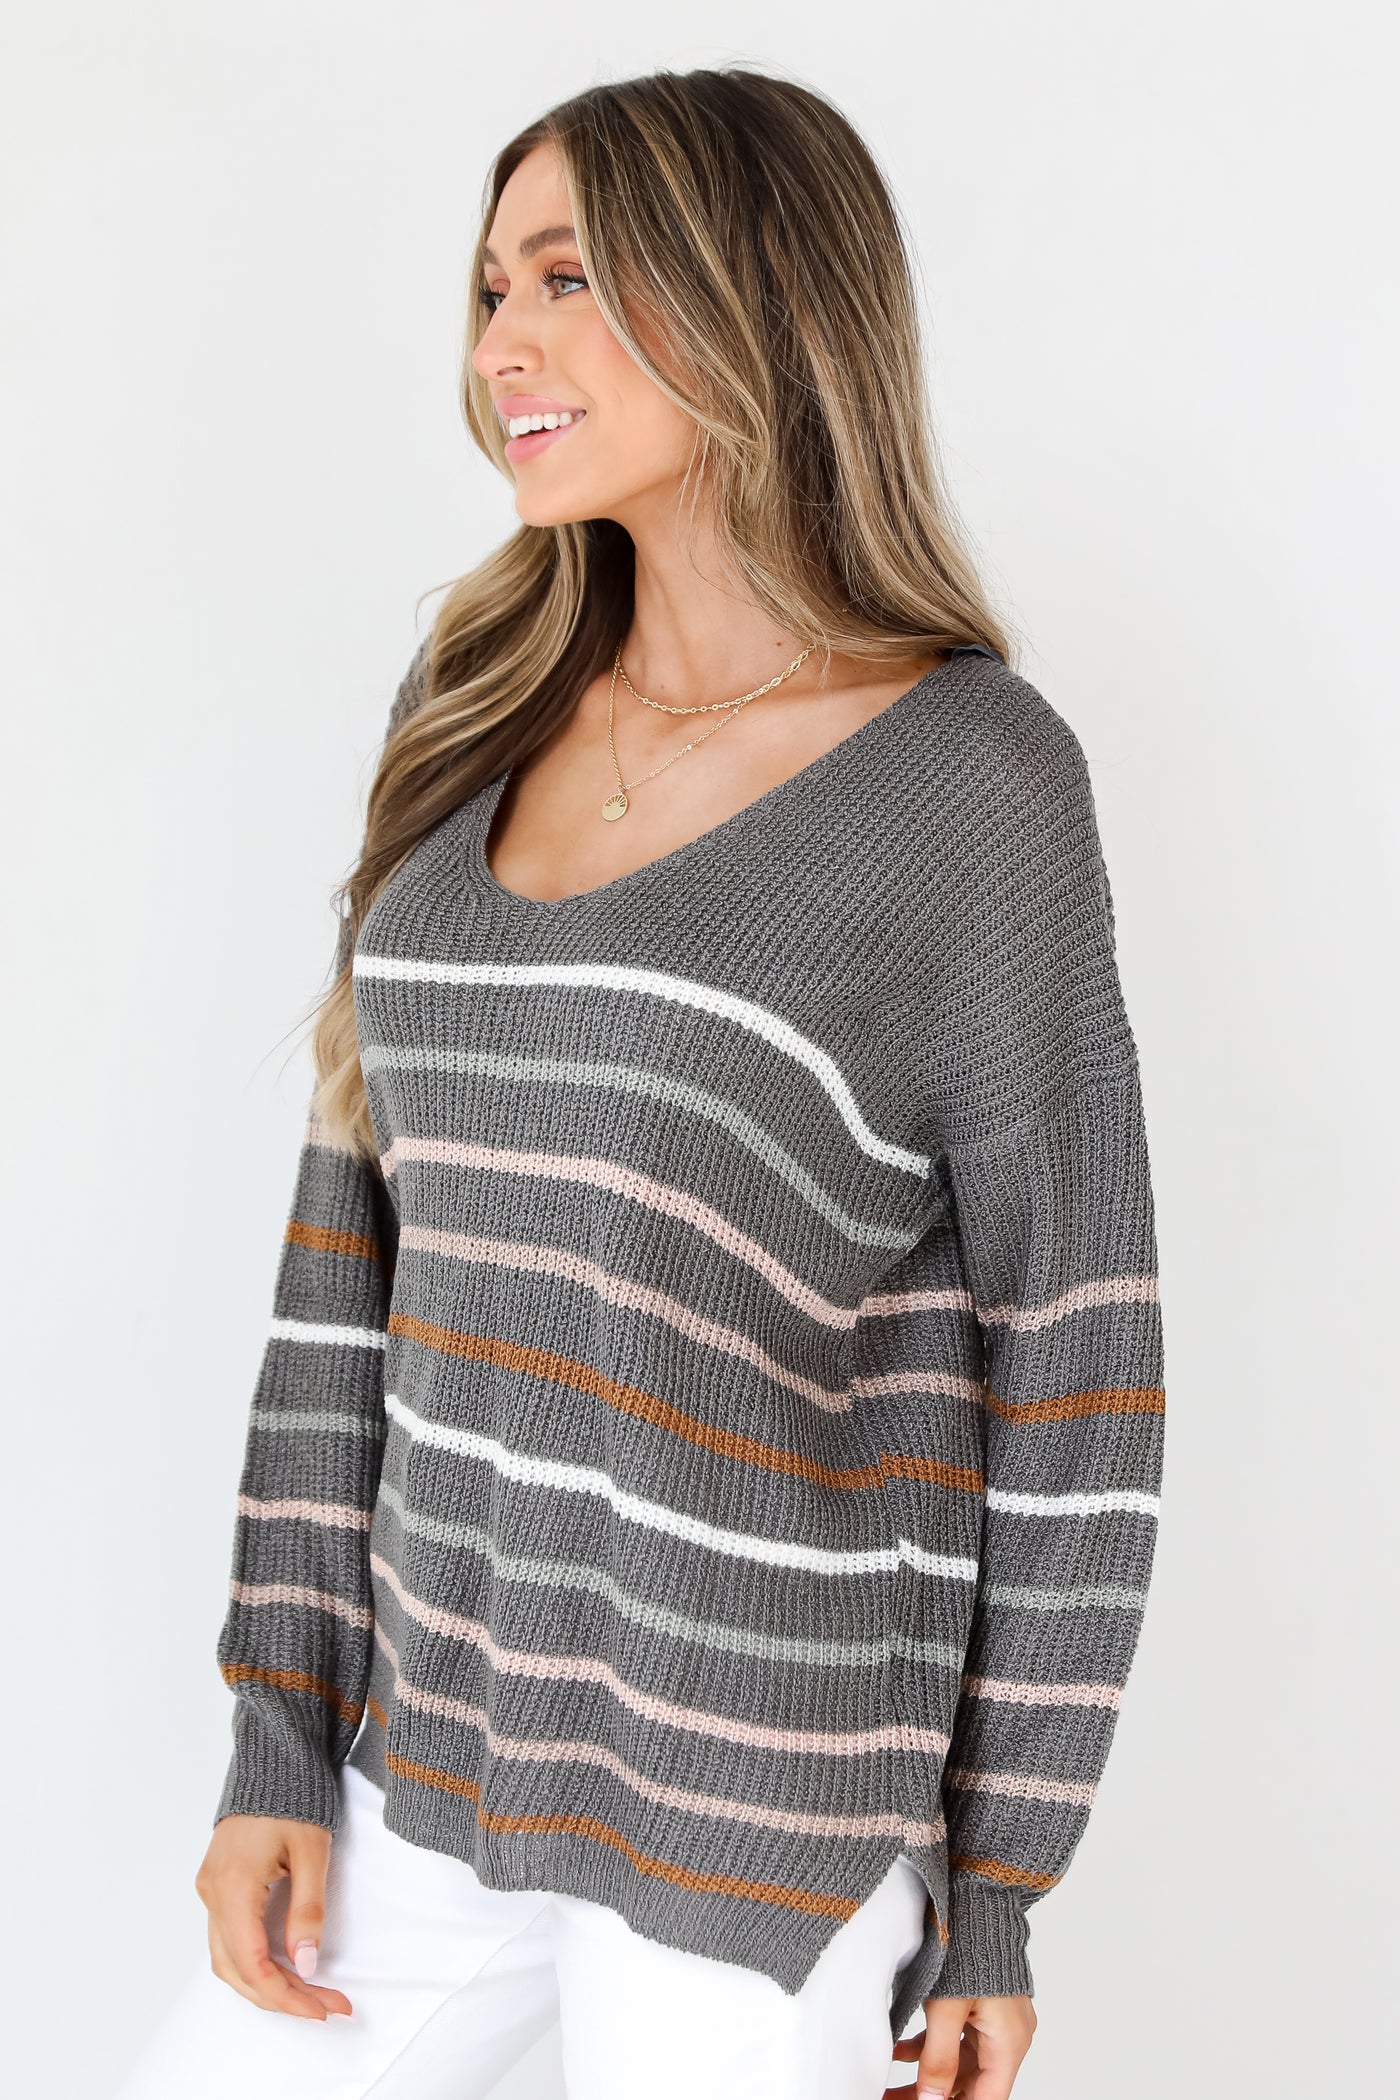 Striped Lightweight Knit Sweater side view